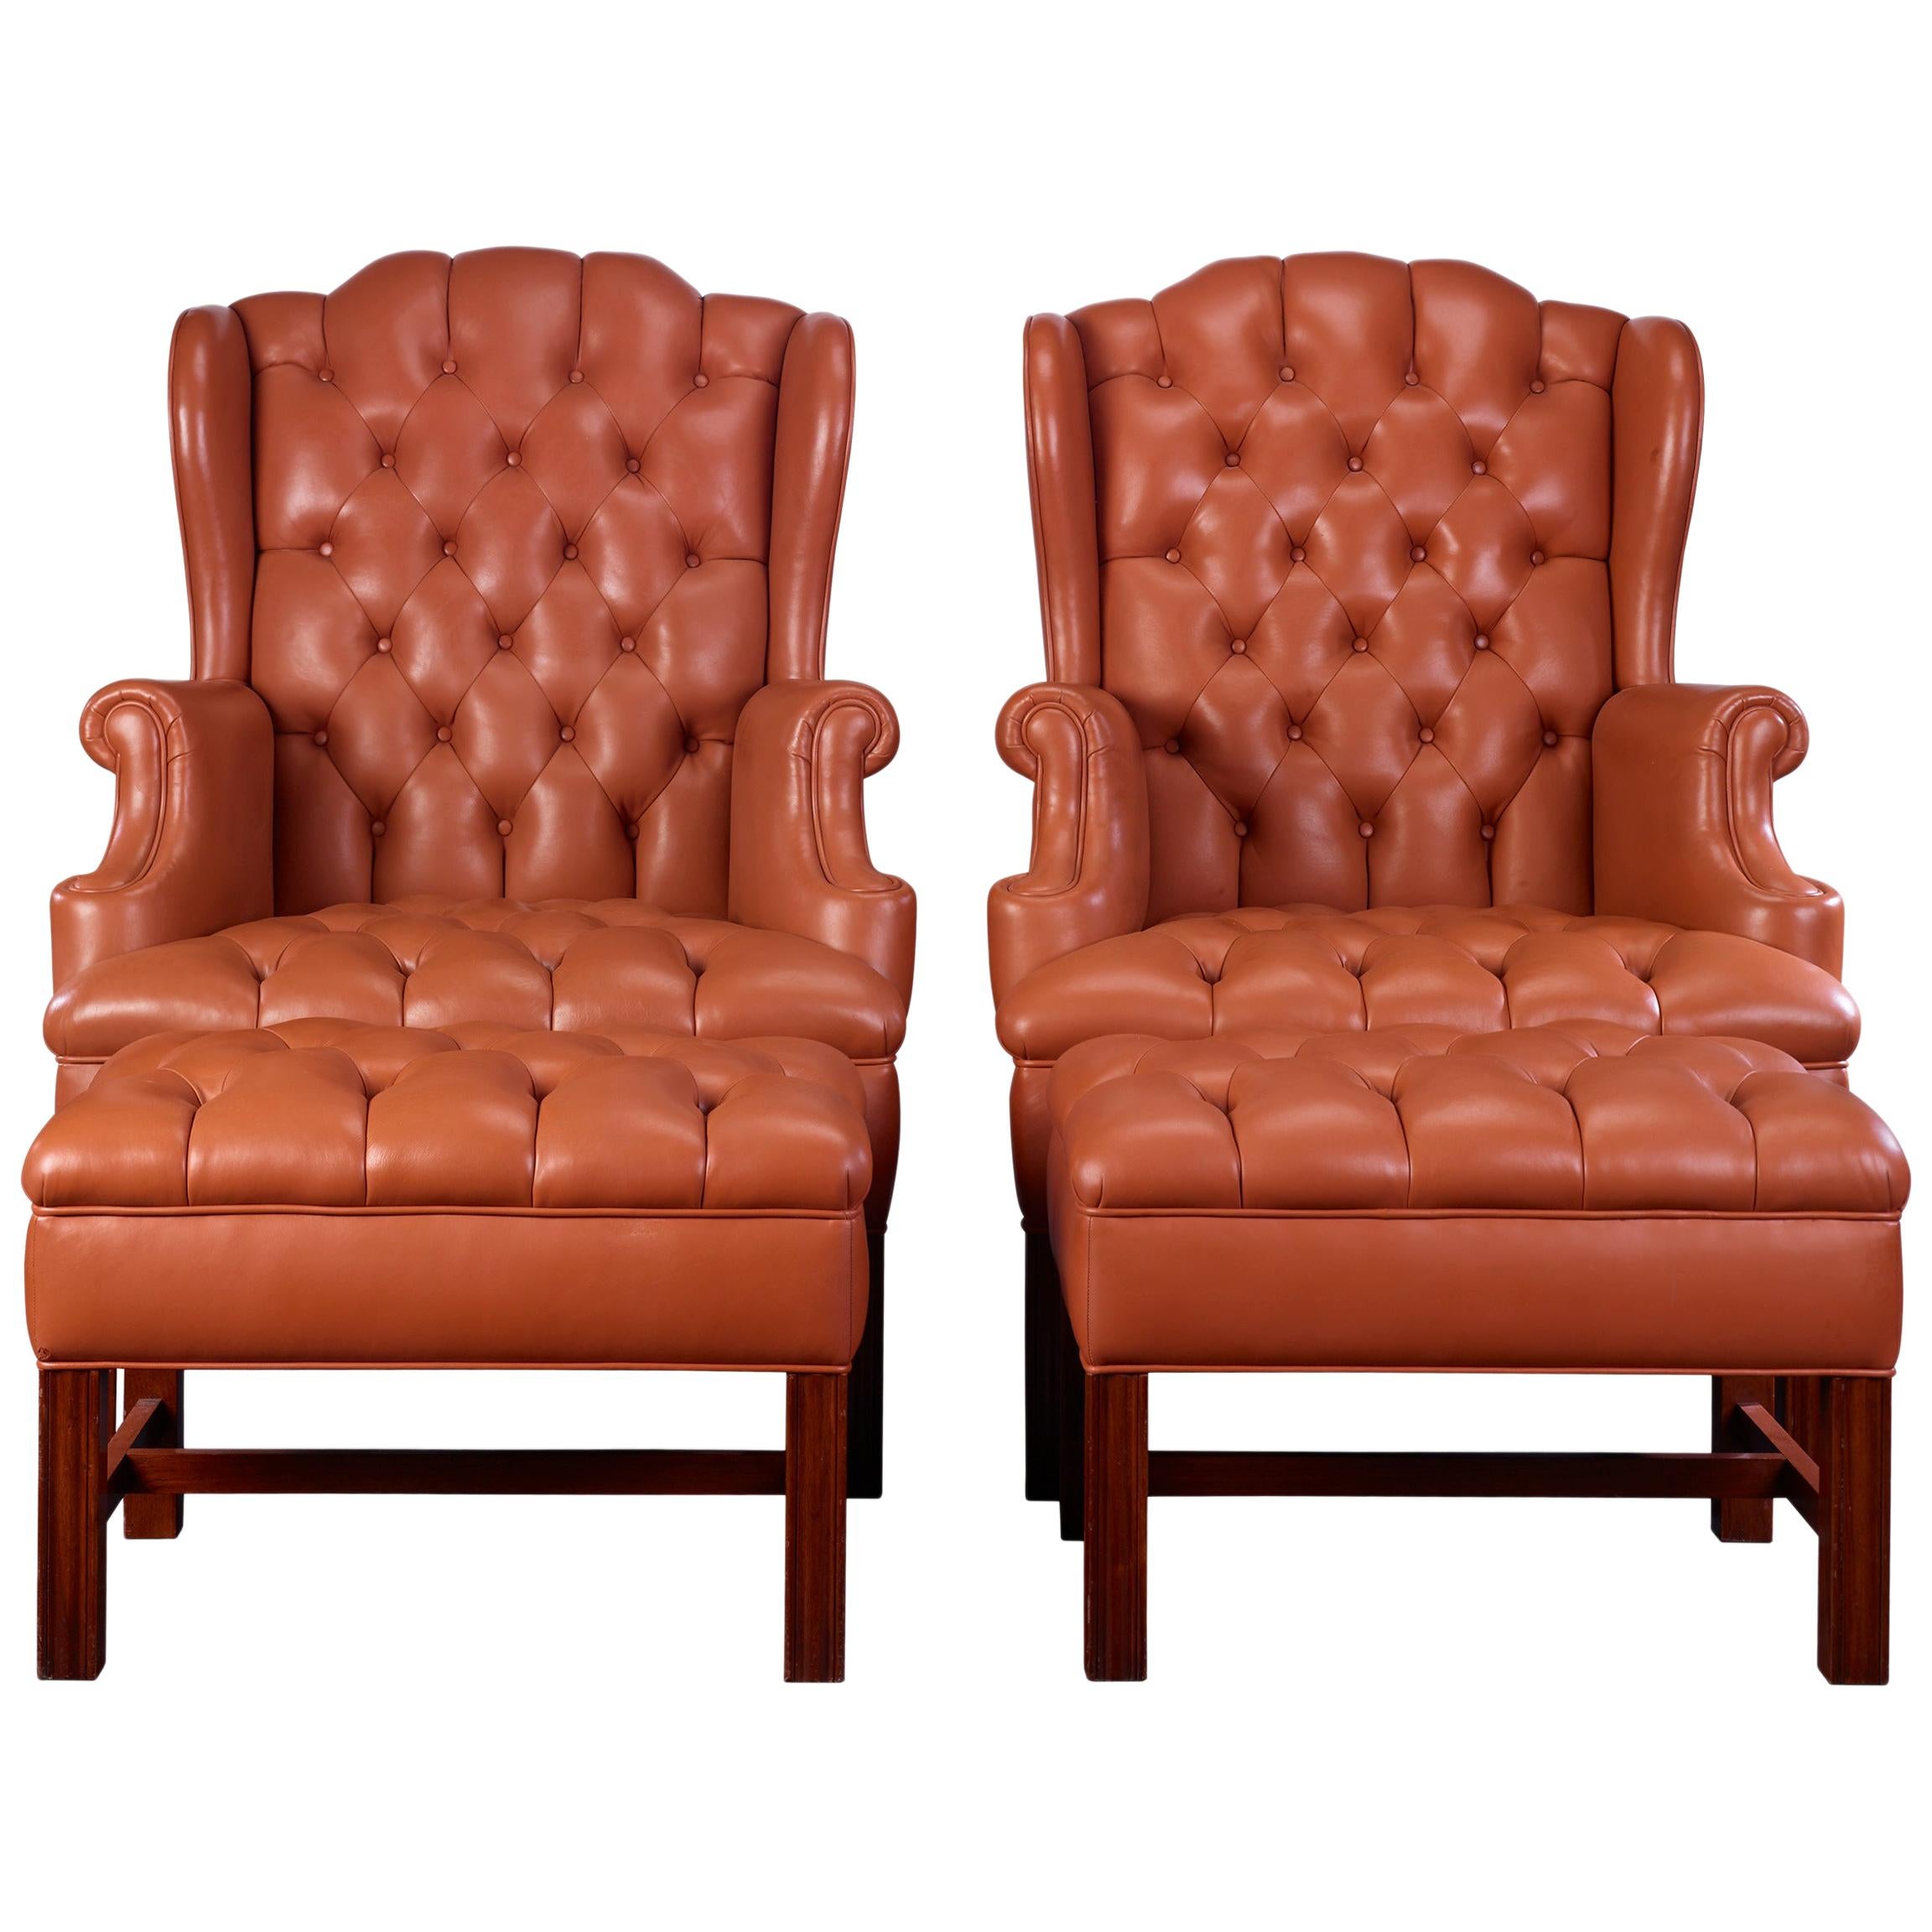 George III-Style Wingback Chairs with Ottomans